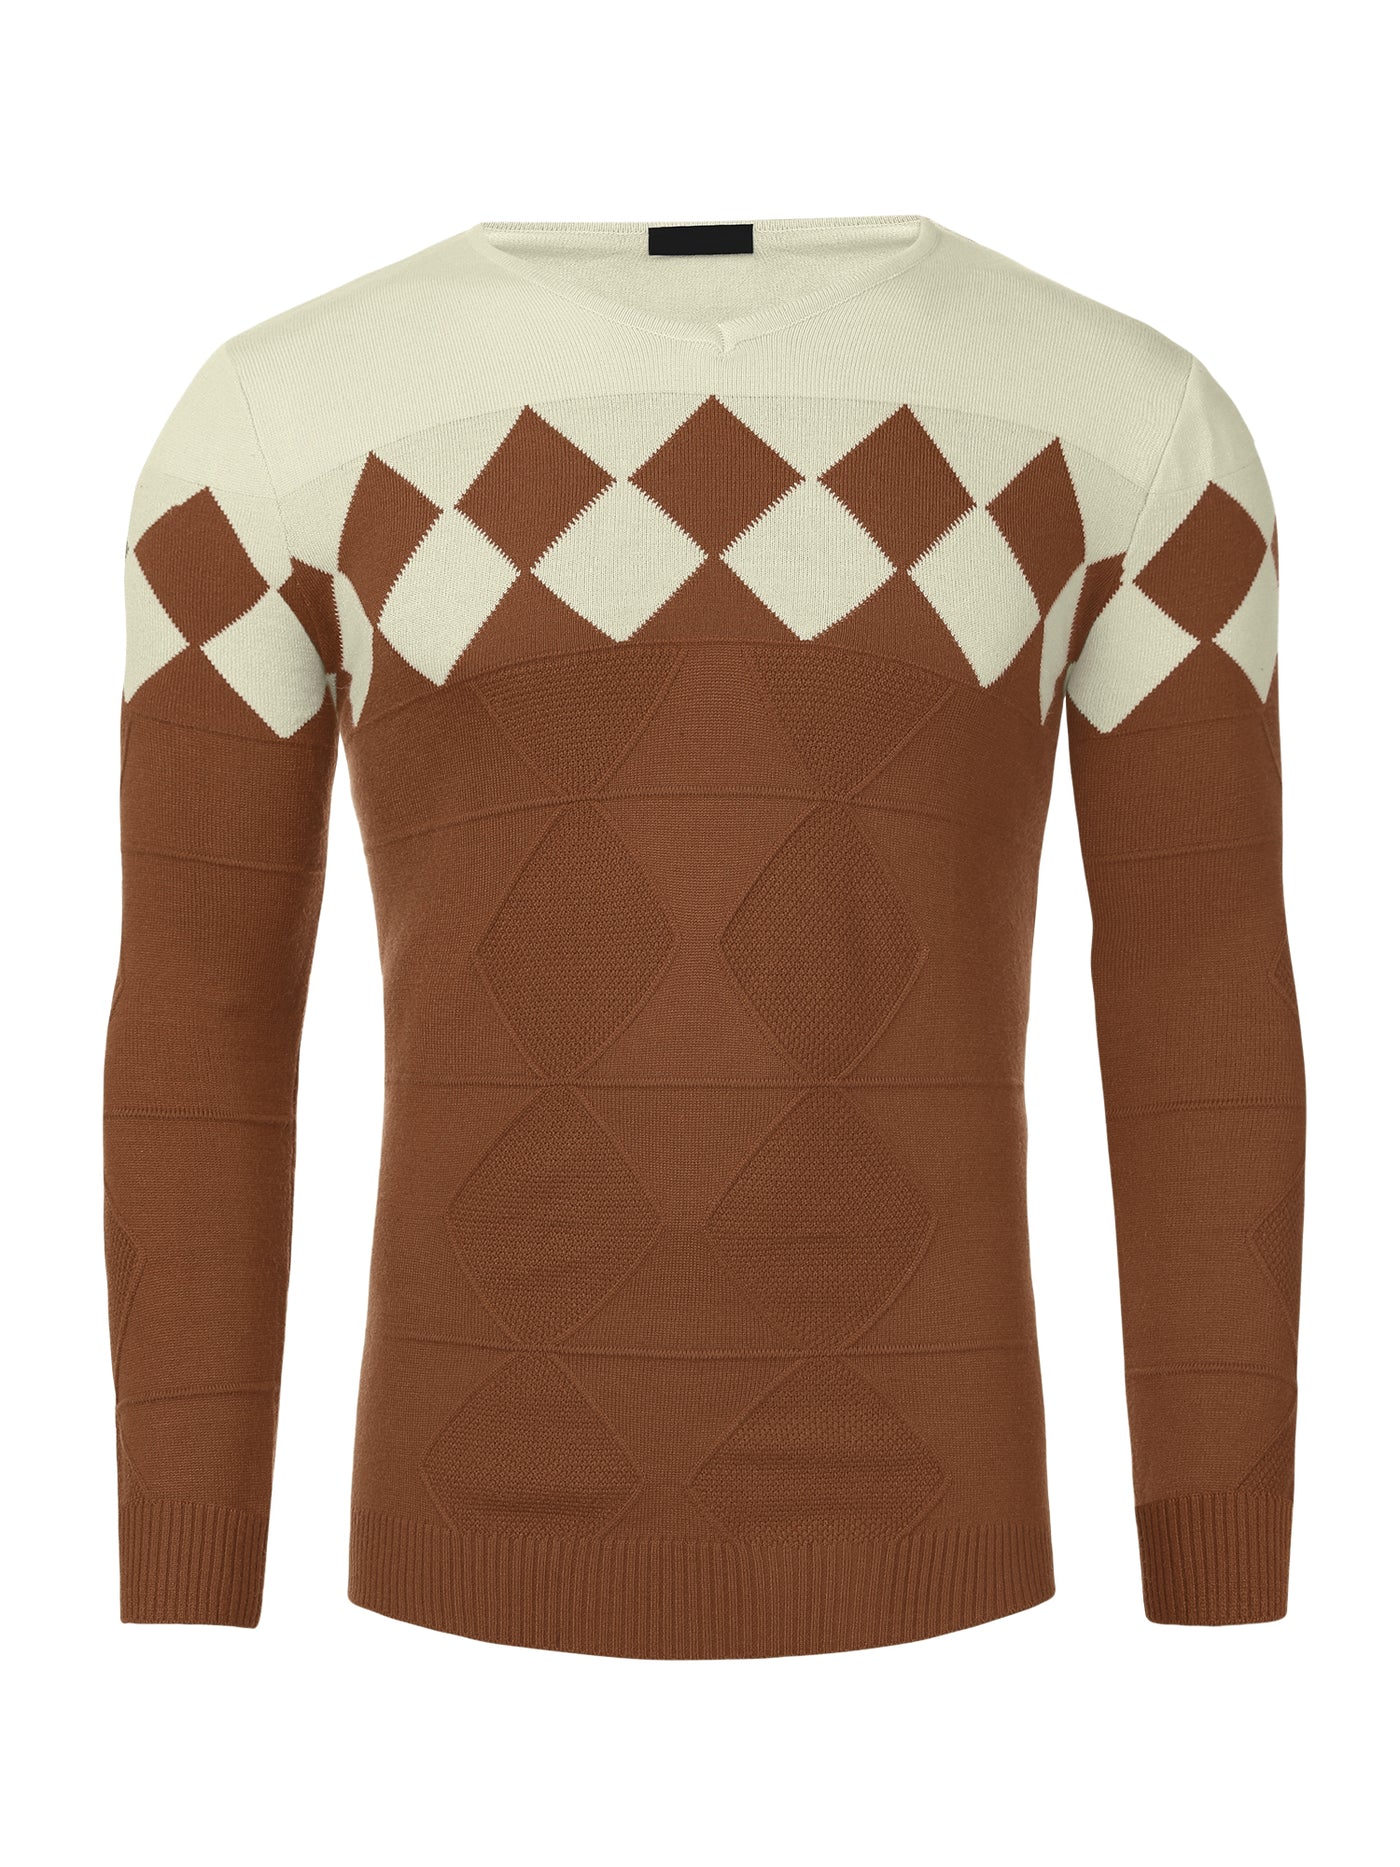 Bublédon Argyle Sweater Long Sleeves Slim Fit V Neck Knitted Pullover